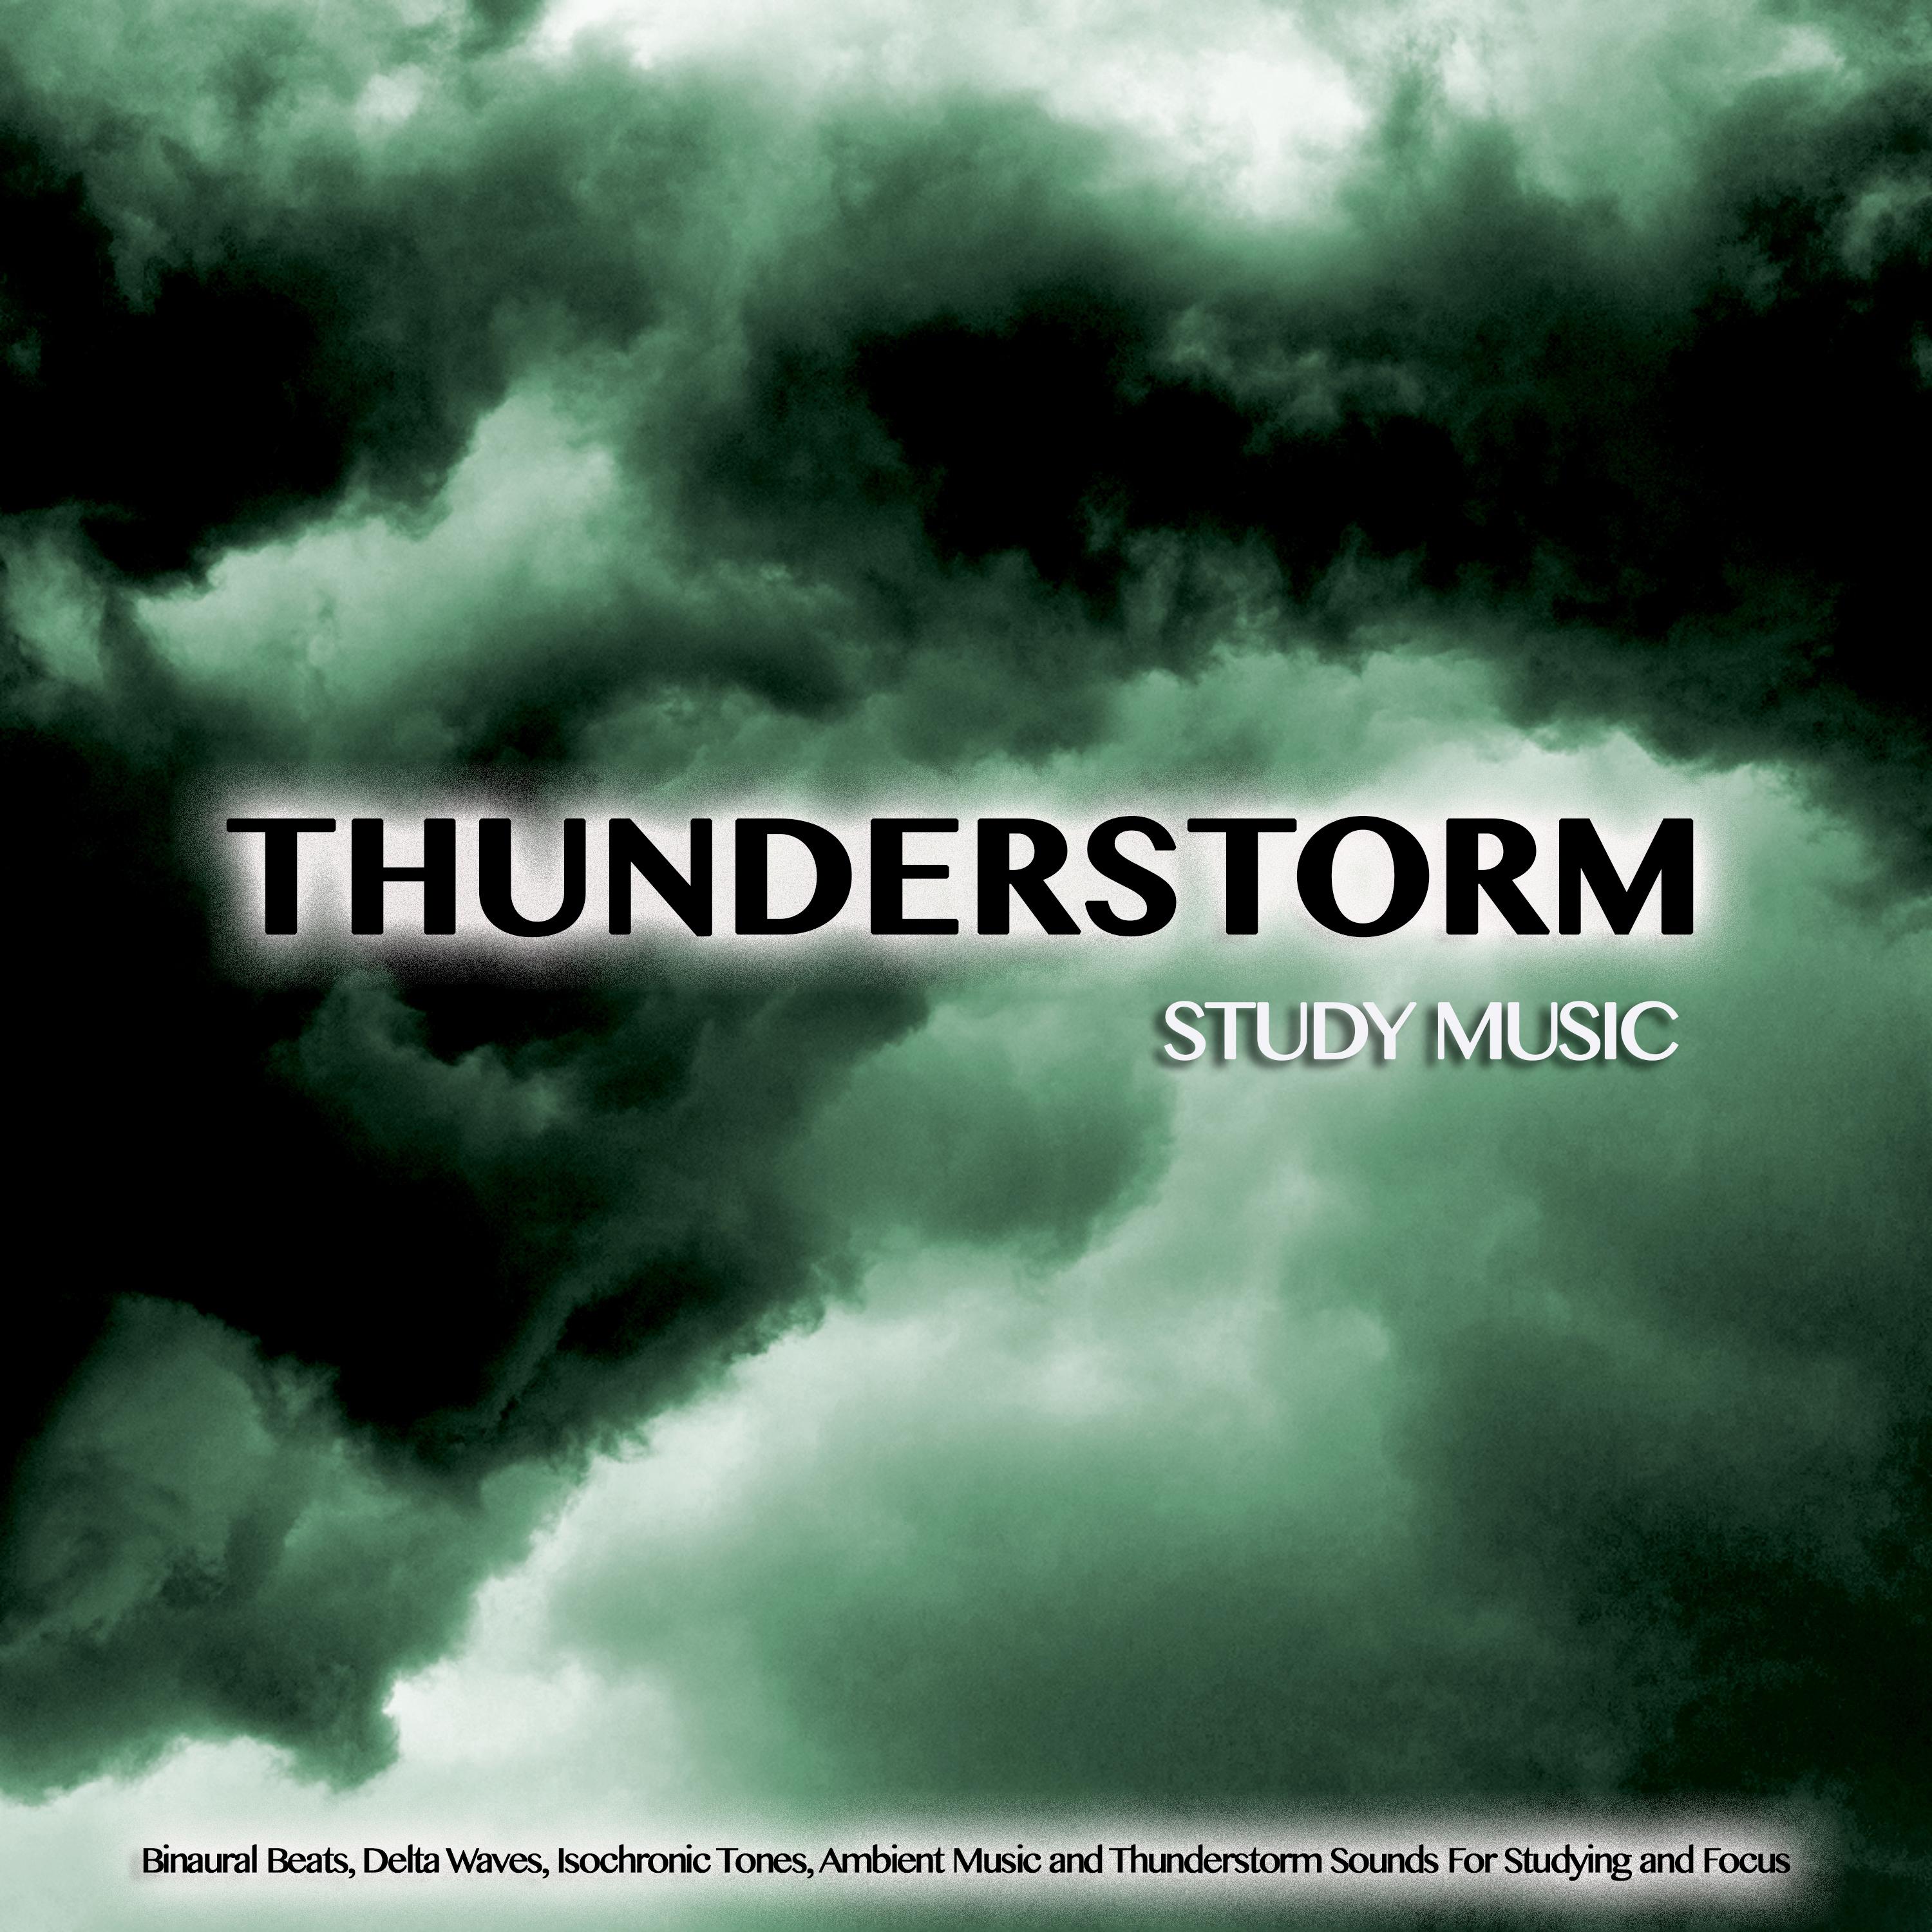 Music For Studying With Thunderstorm Sounds